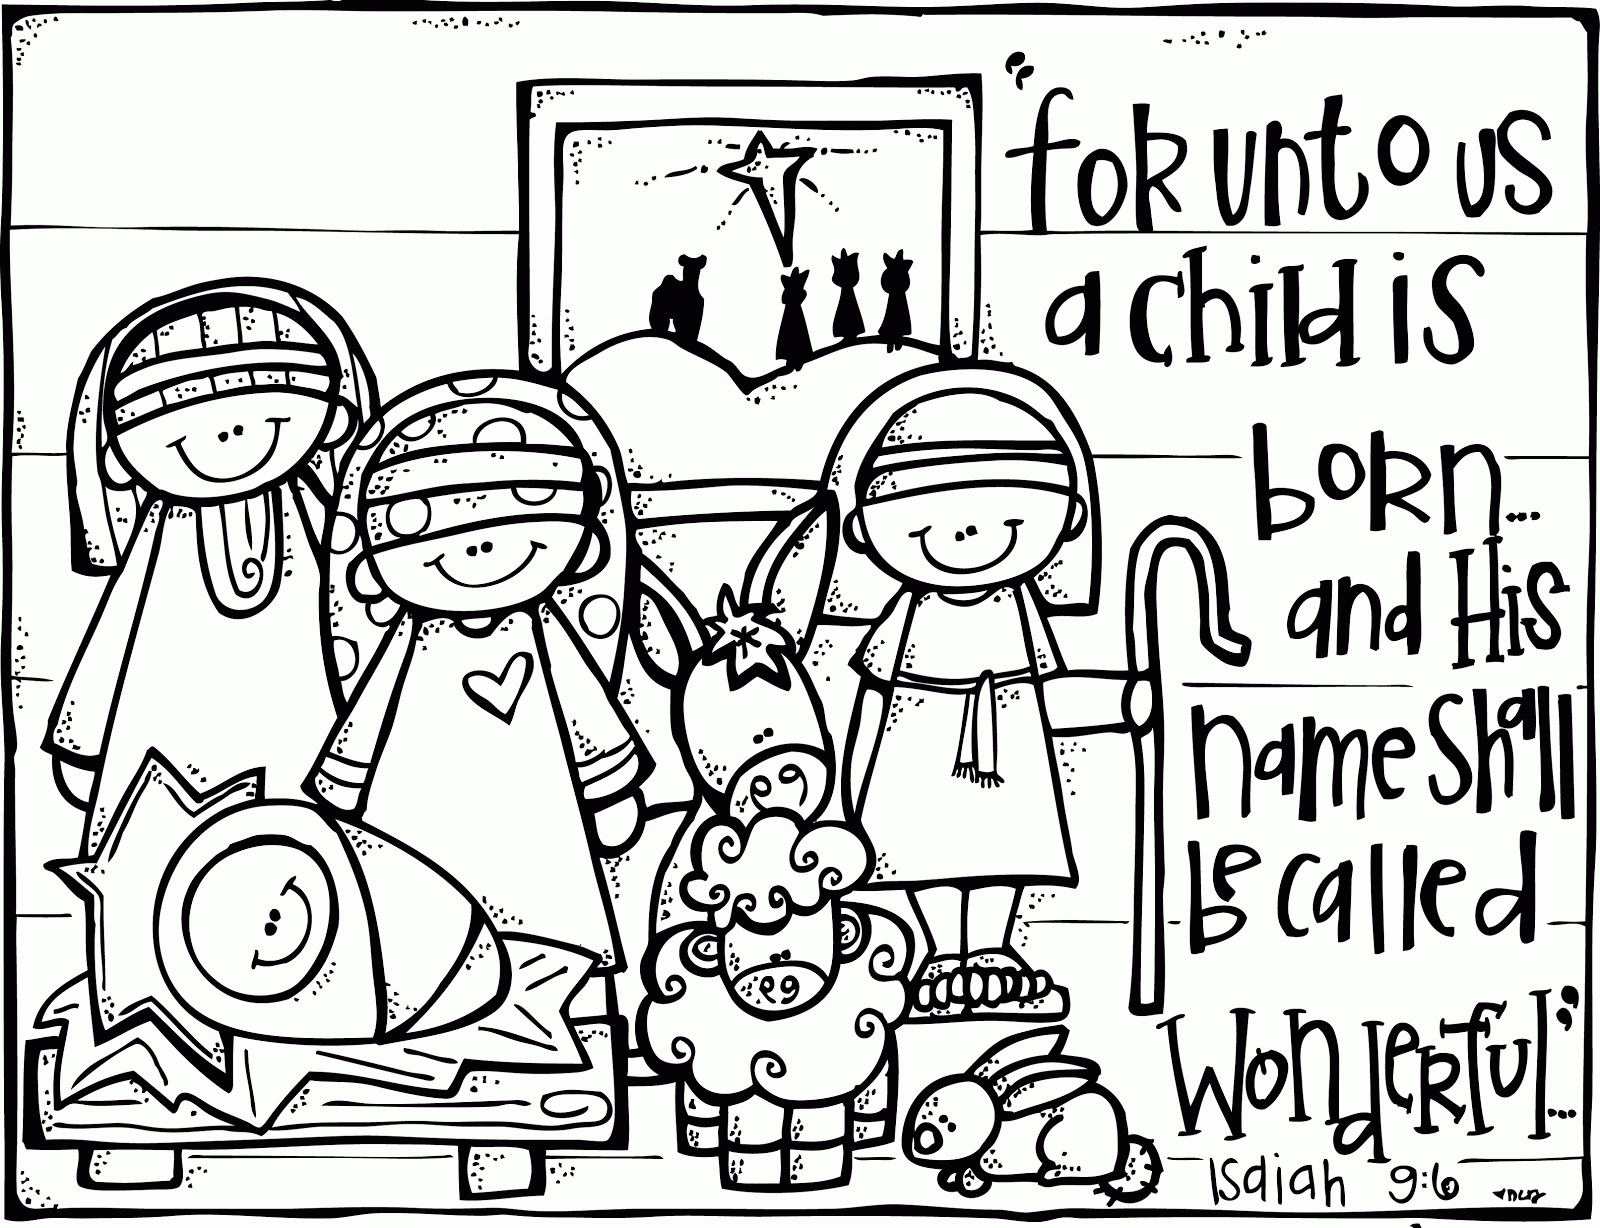 Happy Birthday Jesus Coloring Page (15 Pictures) - Colorine.net